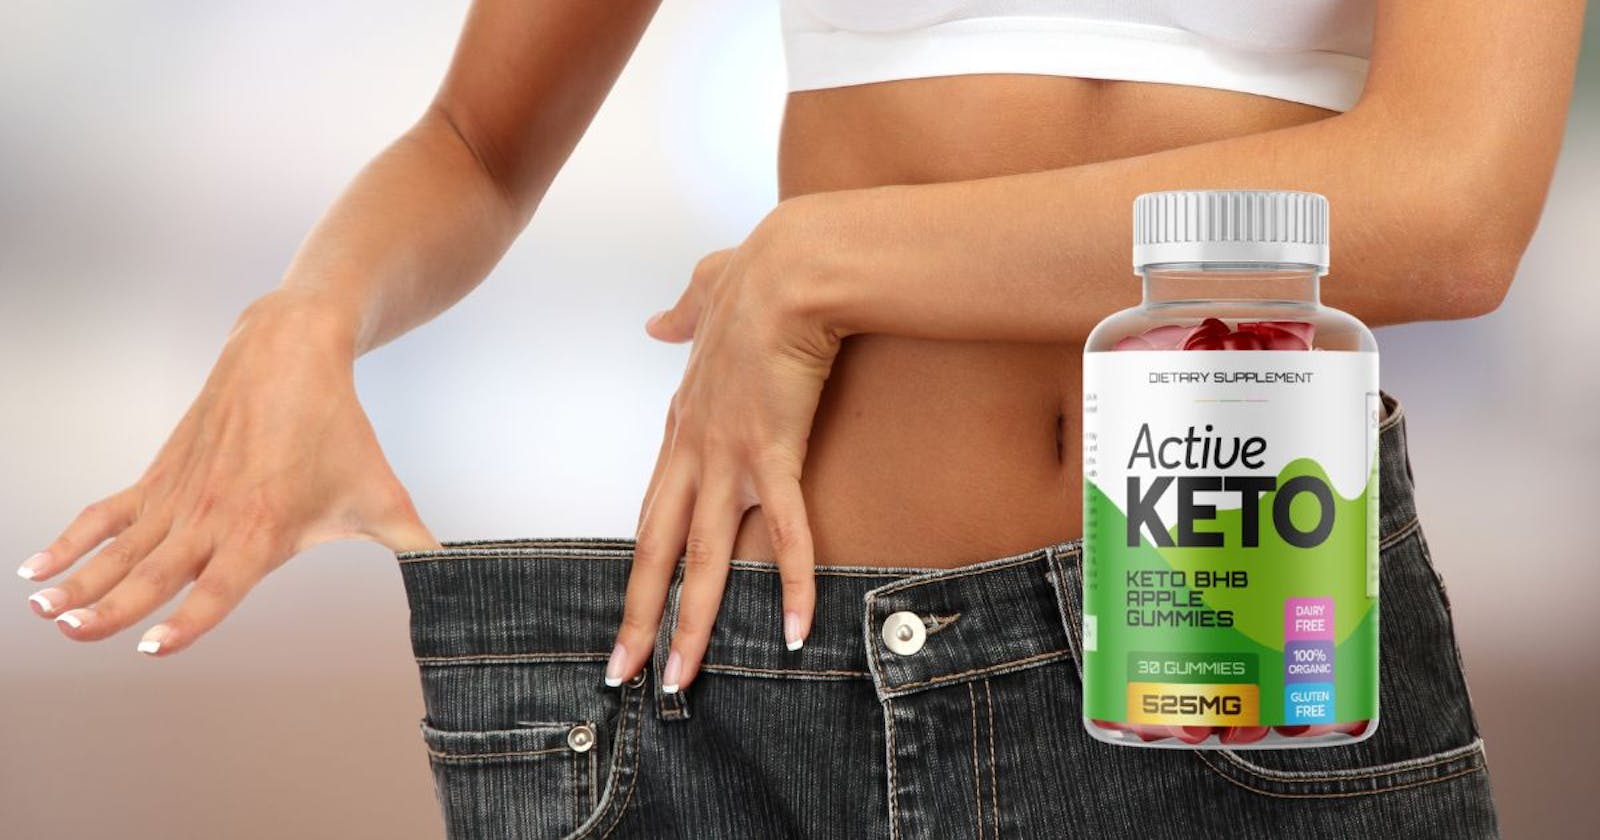 Discover the Benefits of Active Keto Gummies at Holland and Barrett IE!